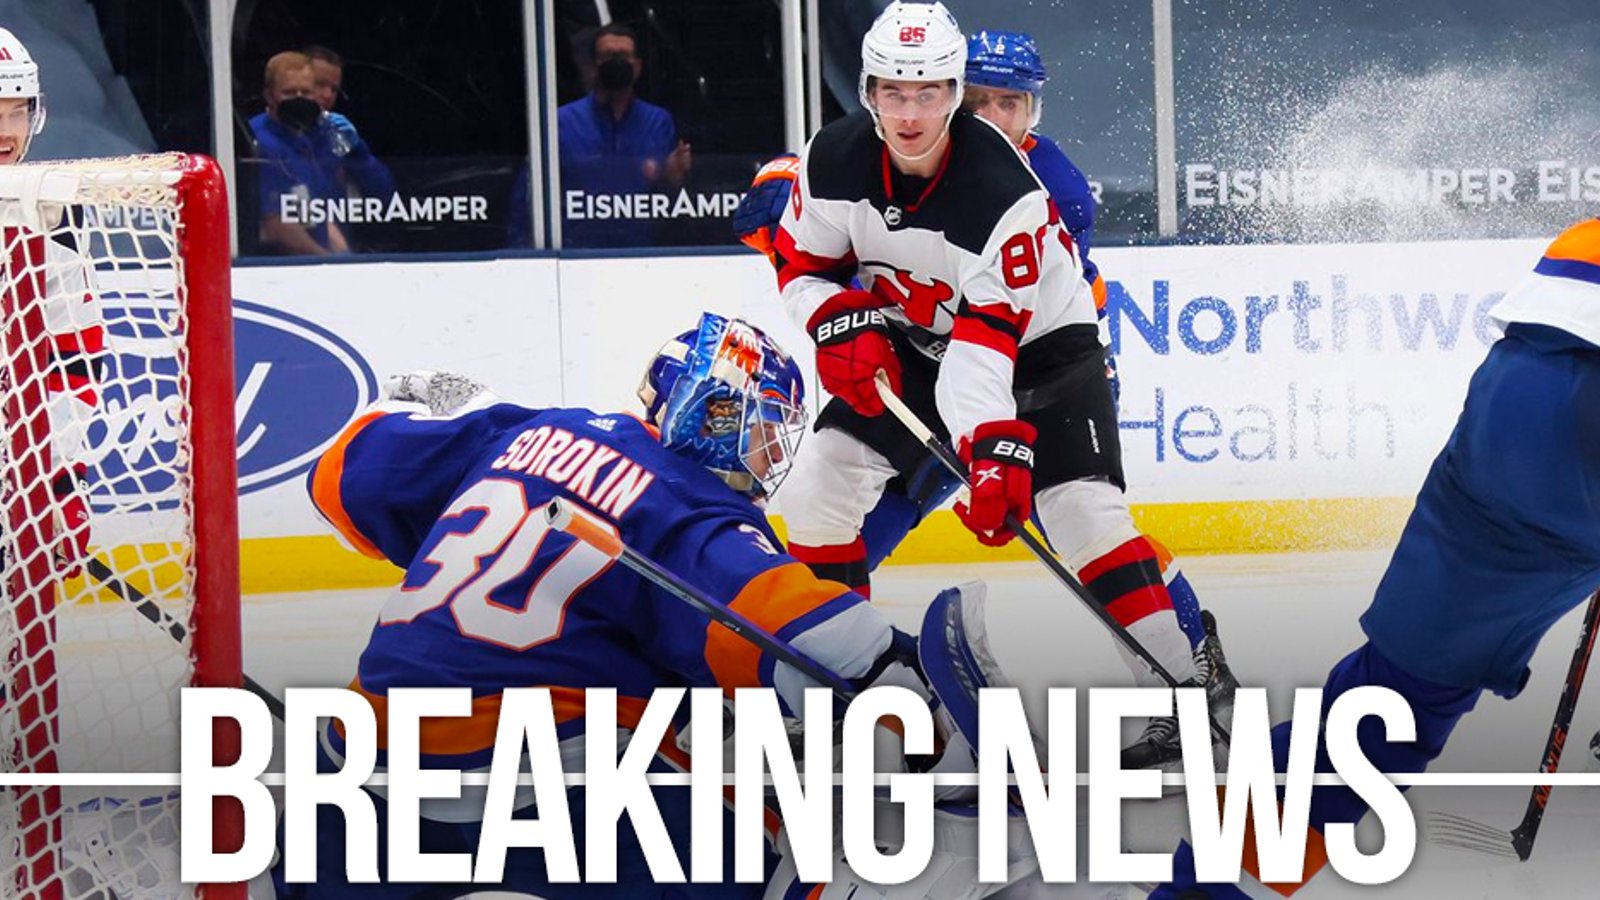 Breaking: Tonight's game between the Islanders and Devils has been cancelled